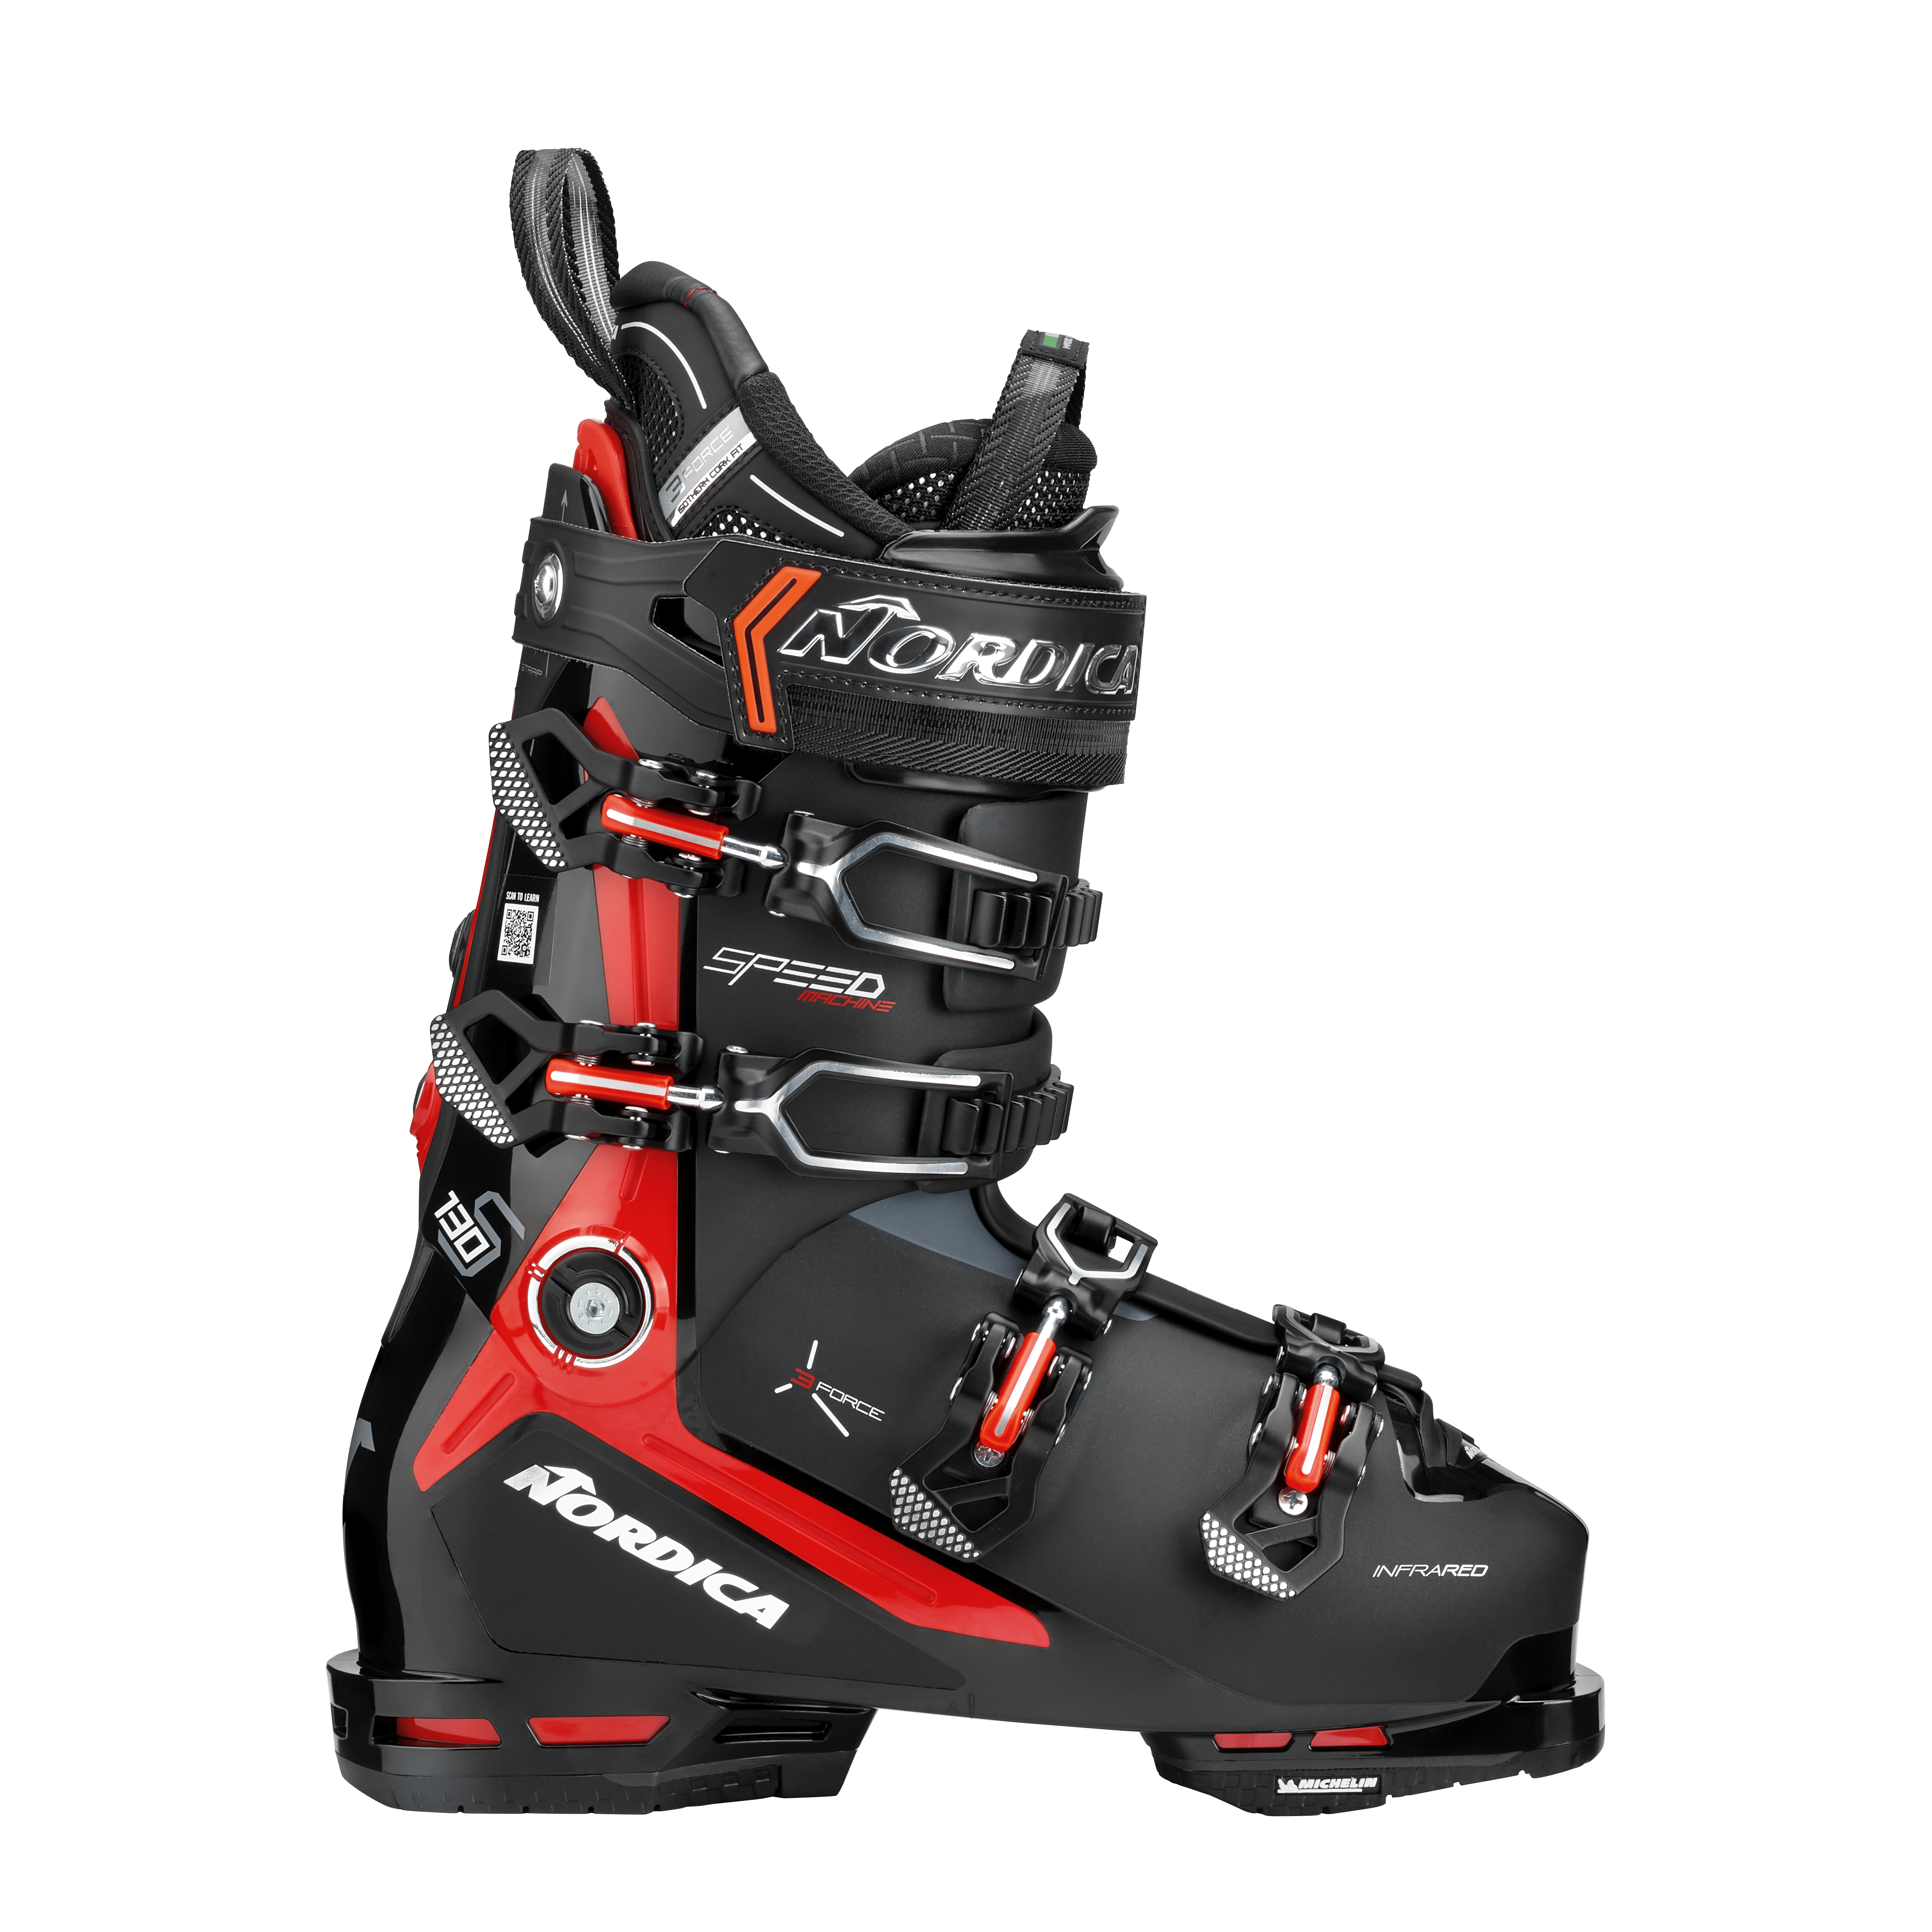 Speedmachine 3 130 S (GW) - Nordica - Skis and Boots – Official